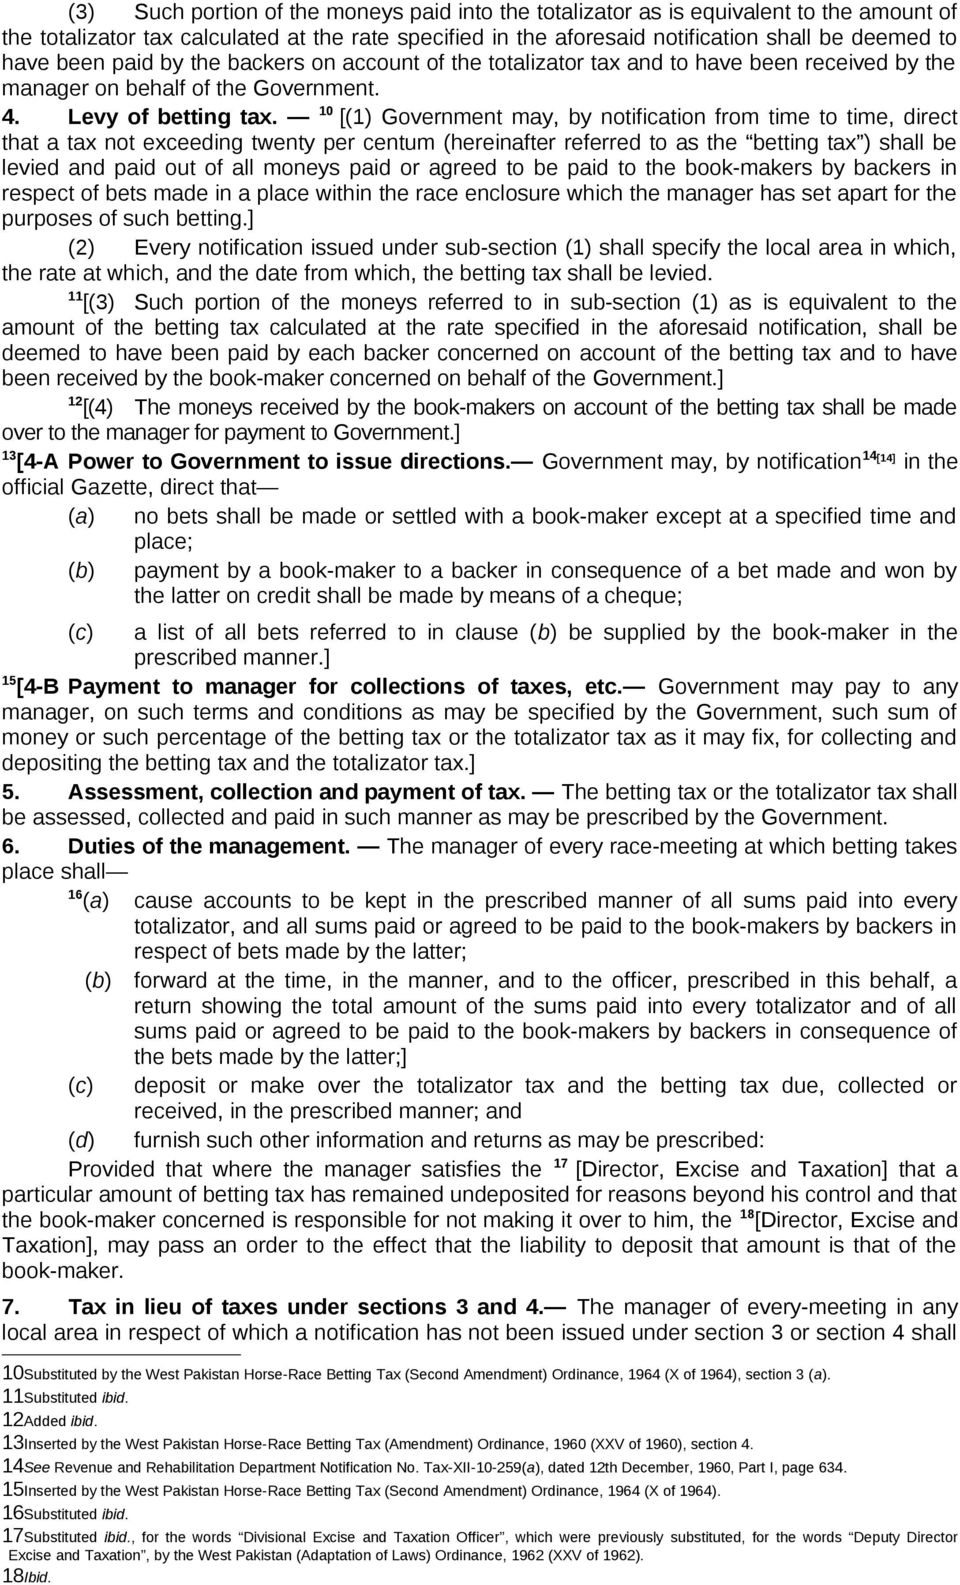 10 [(1) Government may, by notification from time to time, direct that a tax not exceeding twenty per centum (hereinafter referred to as the betting tax ) shall be levied and paid out of all moneys